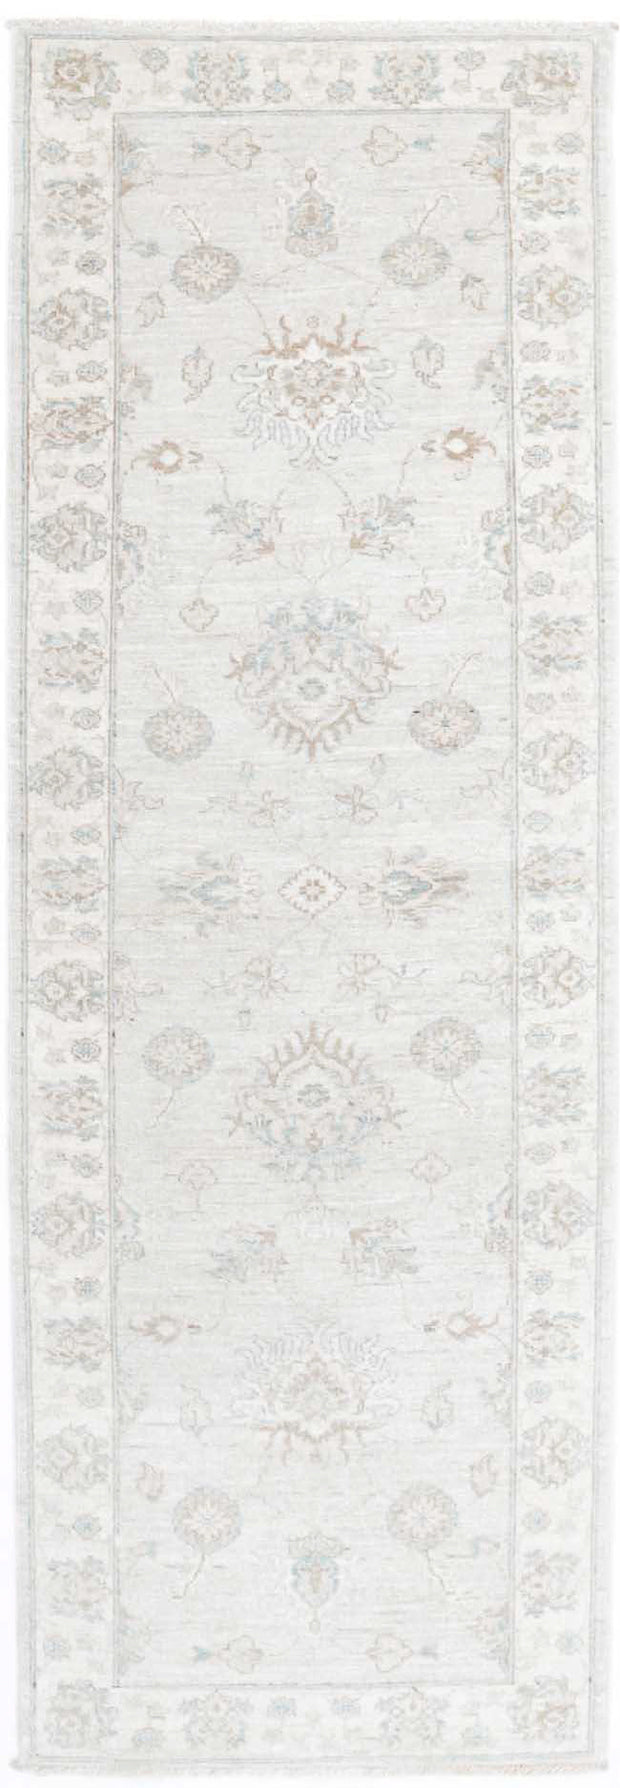 Hand Knotted Serenity Wool Rug 2' 6" x 7' 8" - No. AT89806